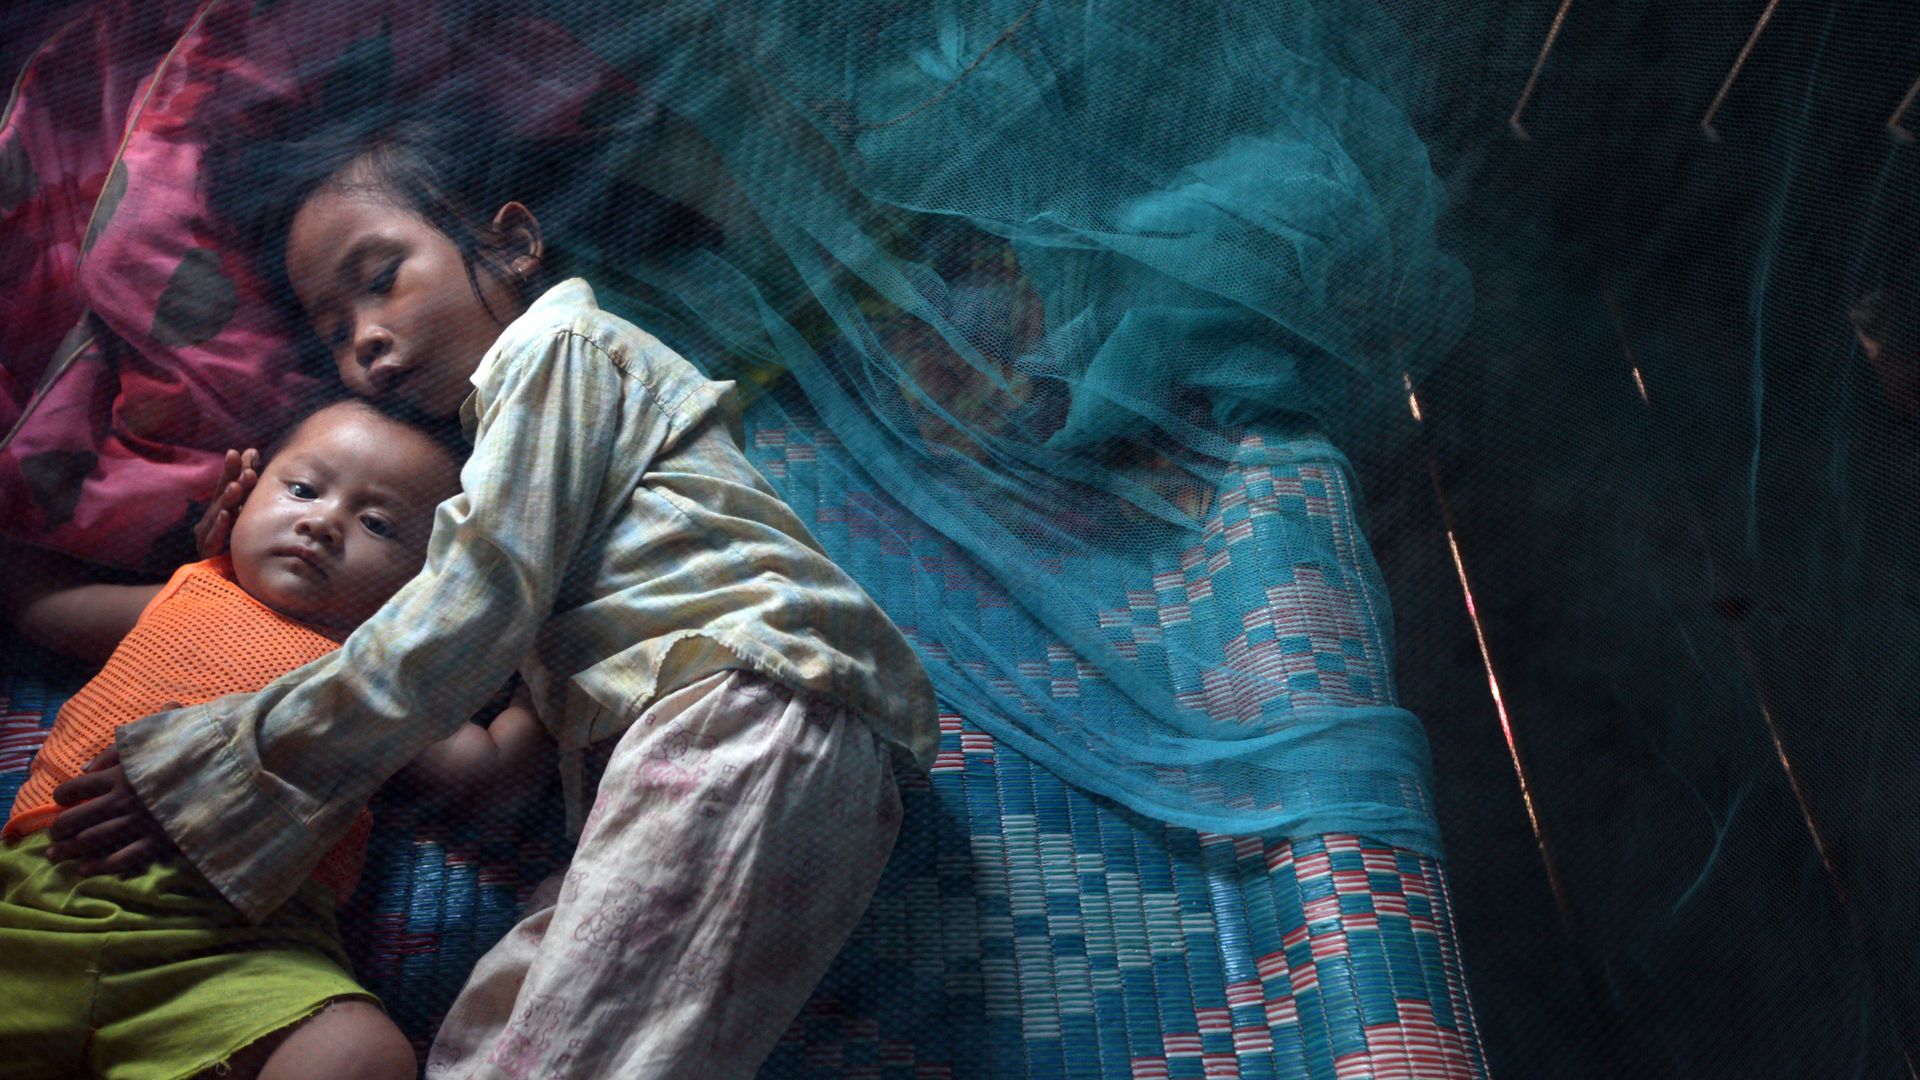 Image of kids underneath bed nets